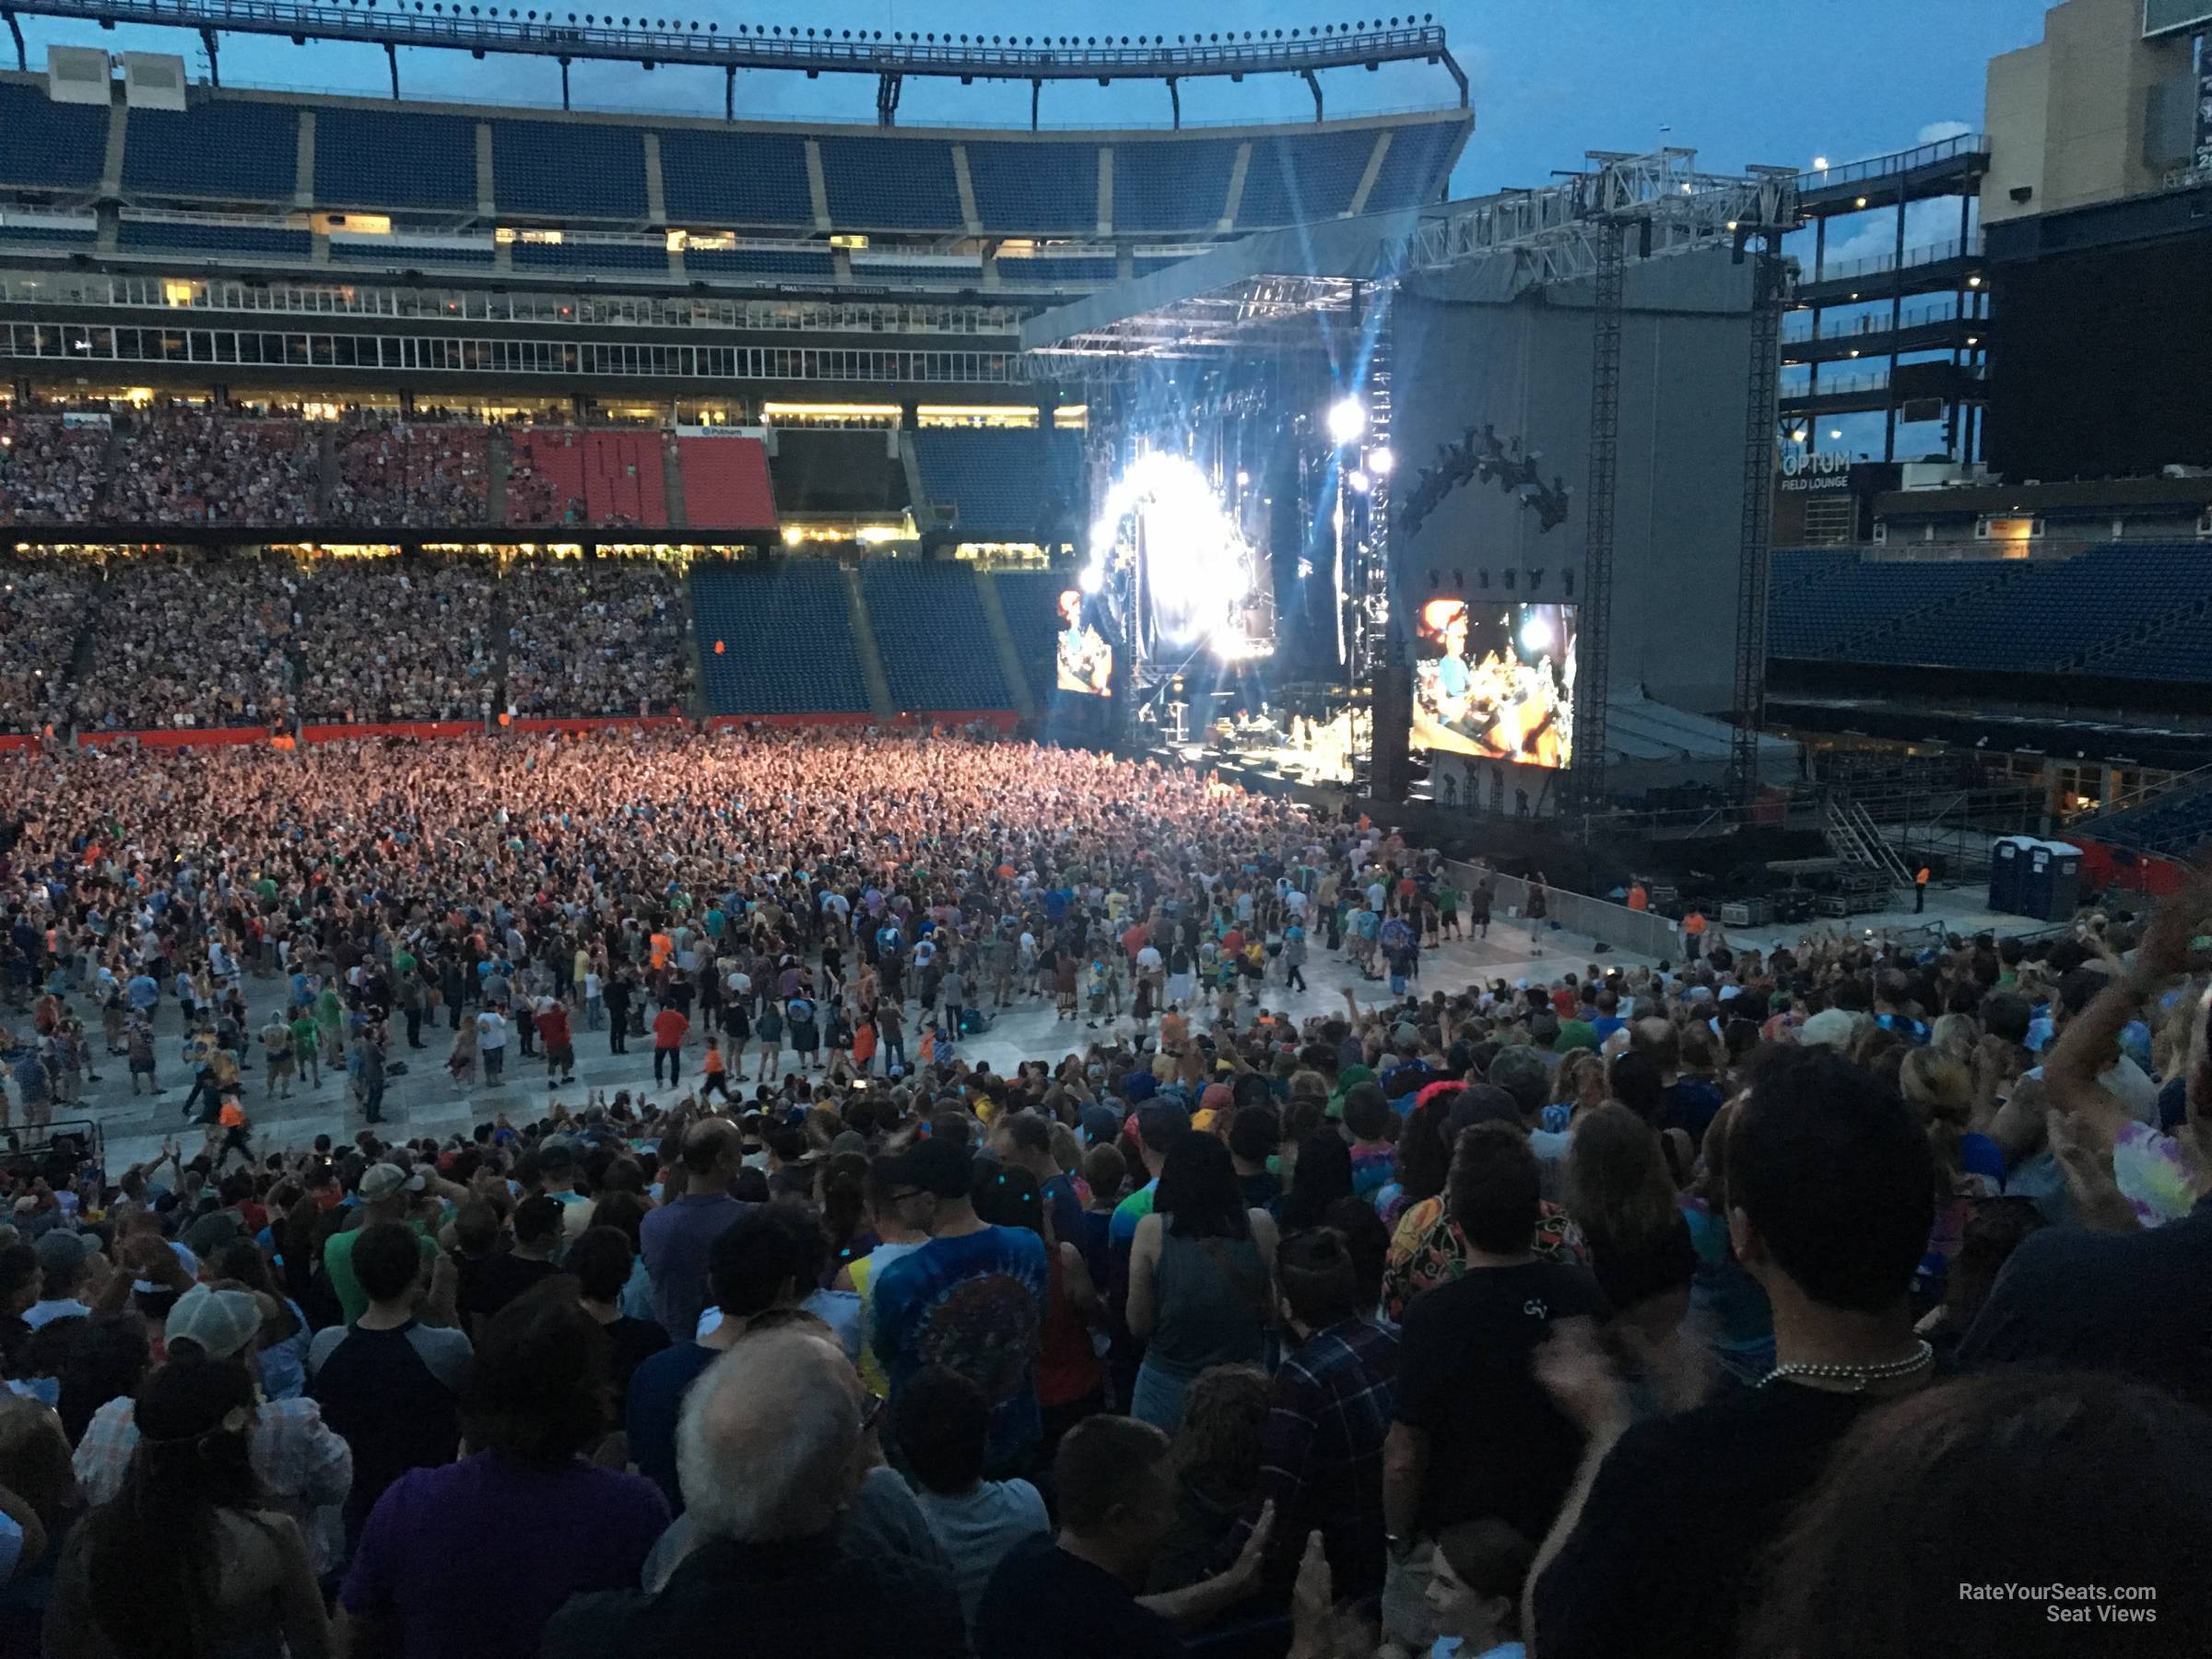 How Many Seats In Each Row At Gillette Stadium Concert